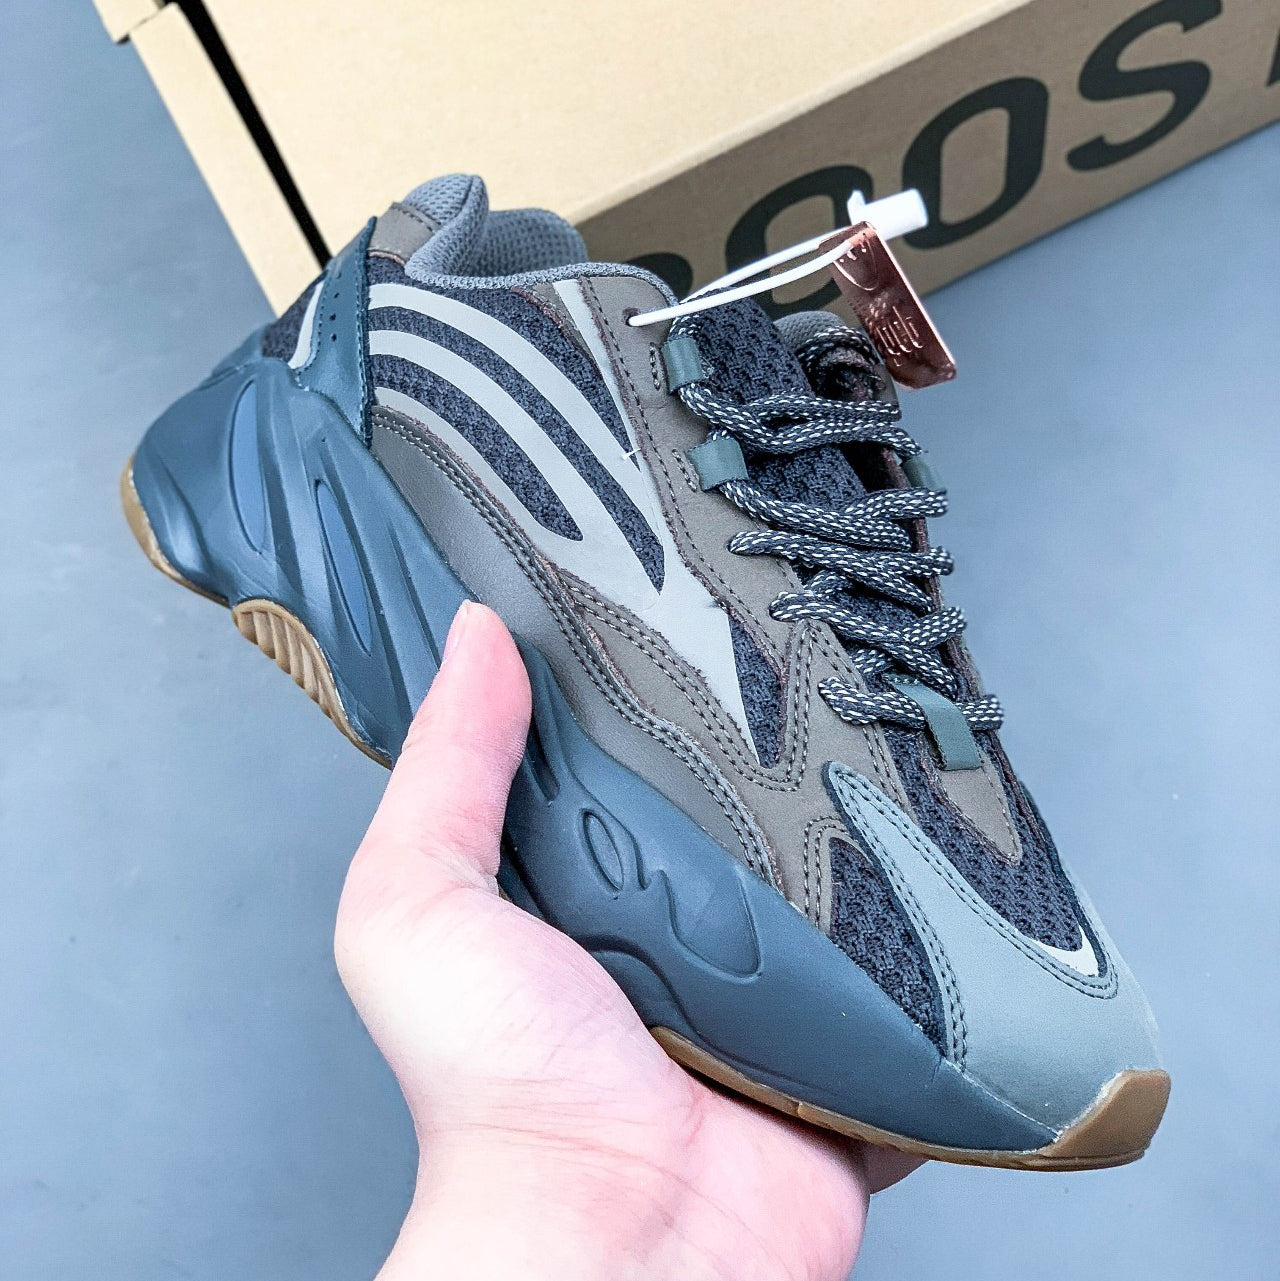 Adidas Yeezy Boost 700 v2 Men's and Women's Sneakers Sho